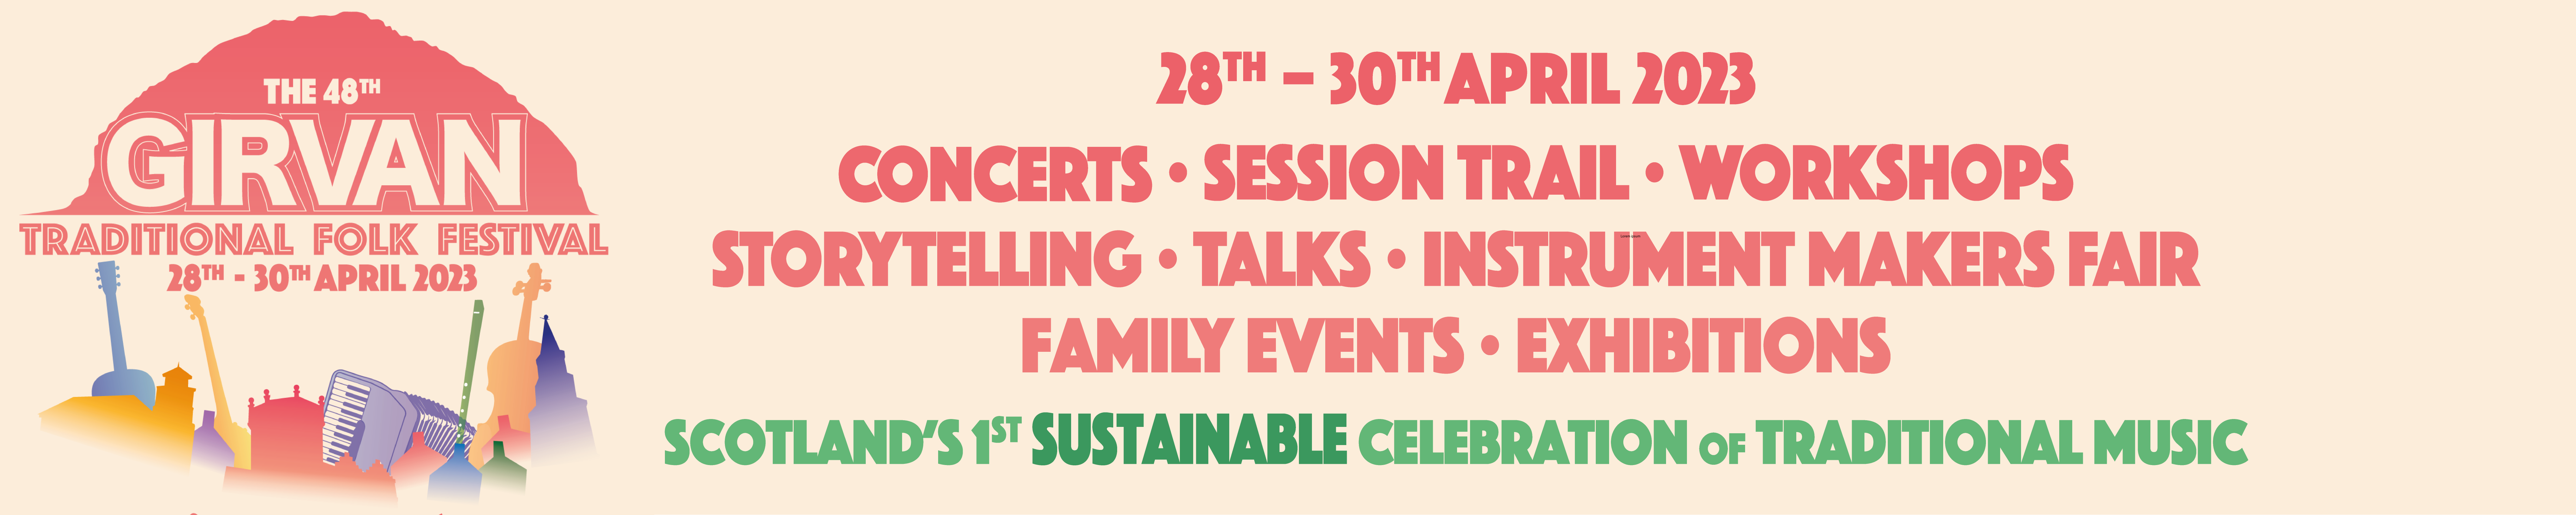 28th–30th April 2023 Girvan Traditional Folk Festival CONCERTS • SESSION TRAIL • WORKSHOPS STORYTELLING • TALKS • INSTRUMENT MAKERS FAIR family EVENTS • EXHIBITIONS